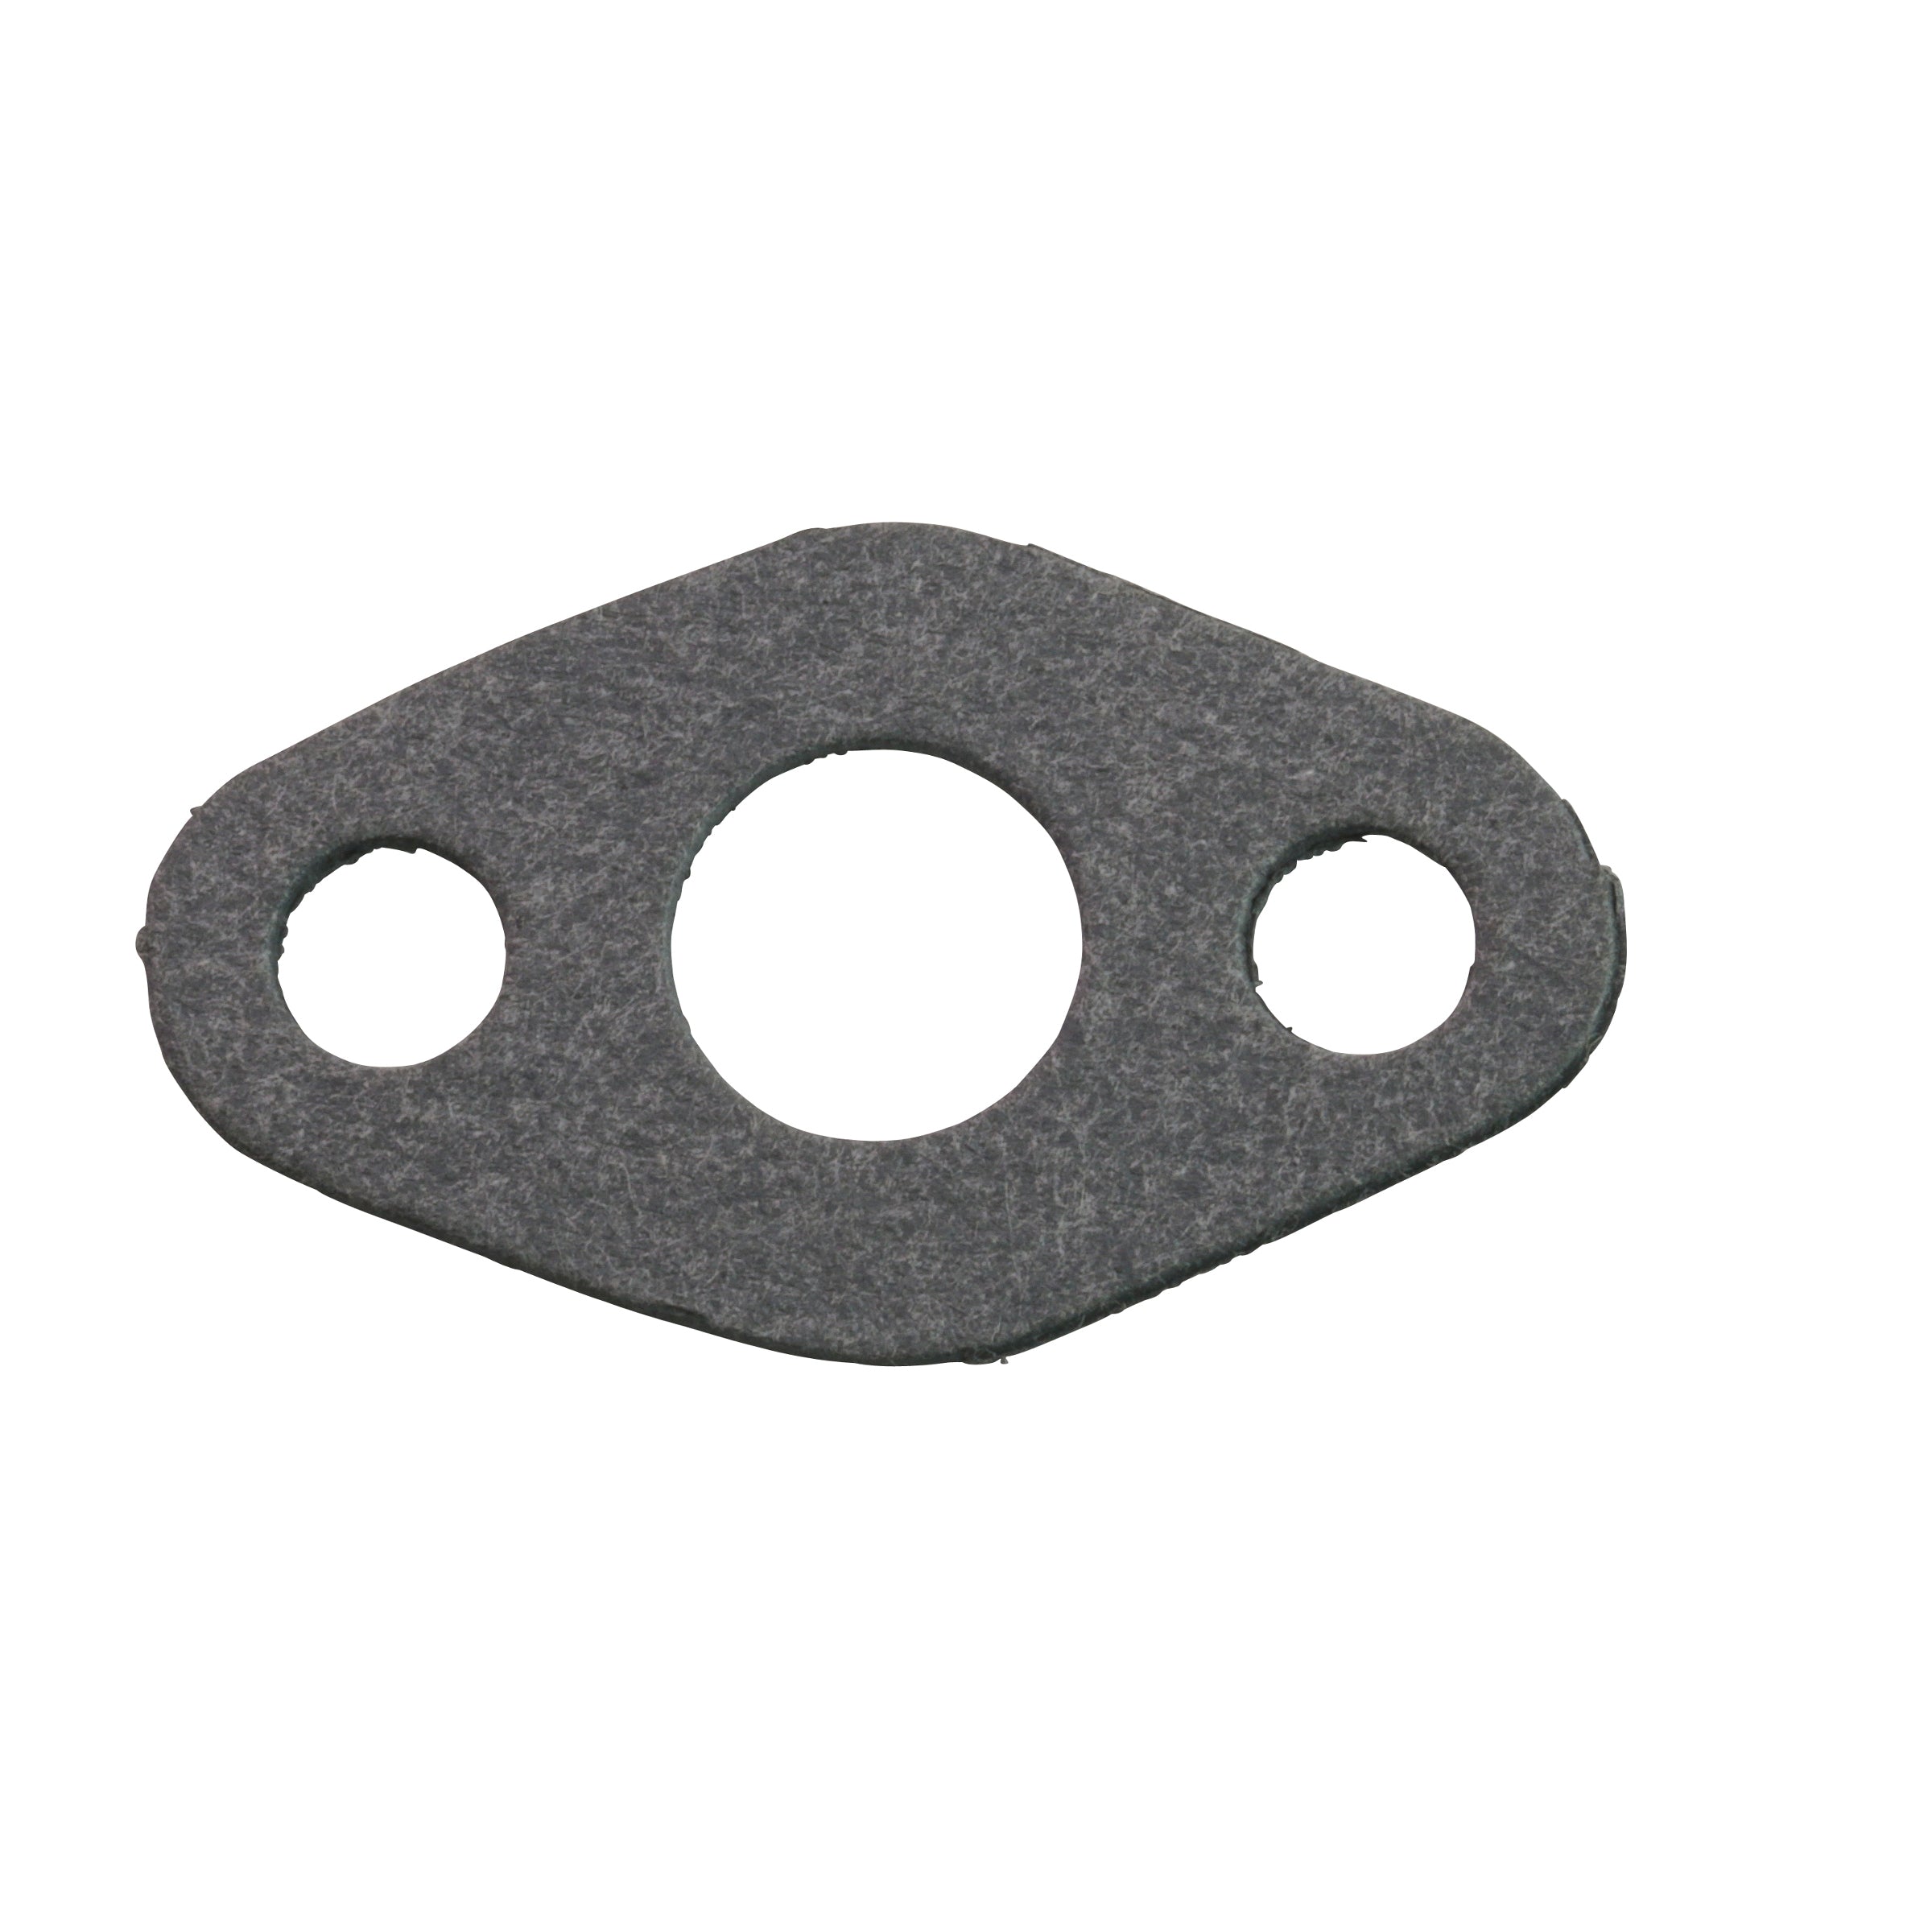 Oil Pump to Oil Pickup Gasket • 1932-53 Ford